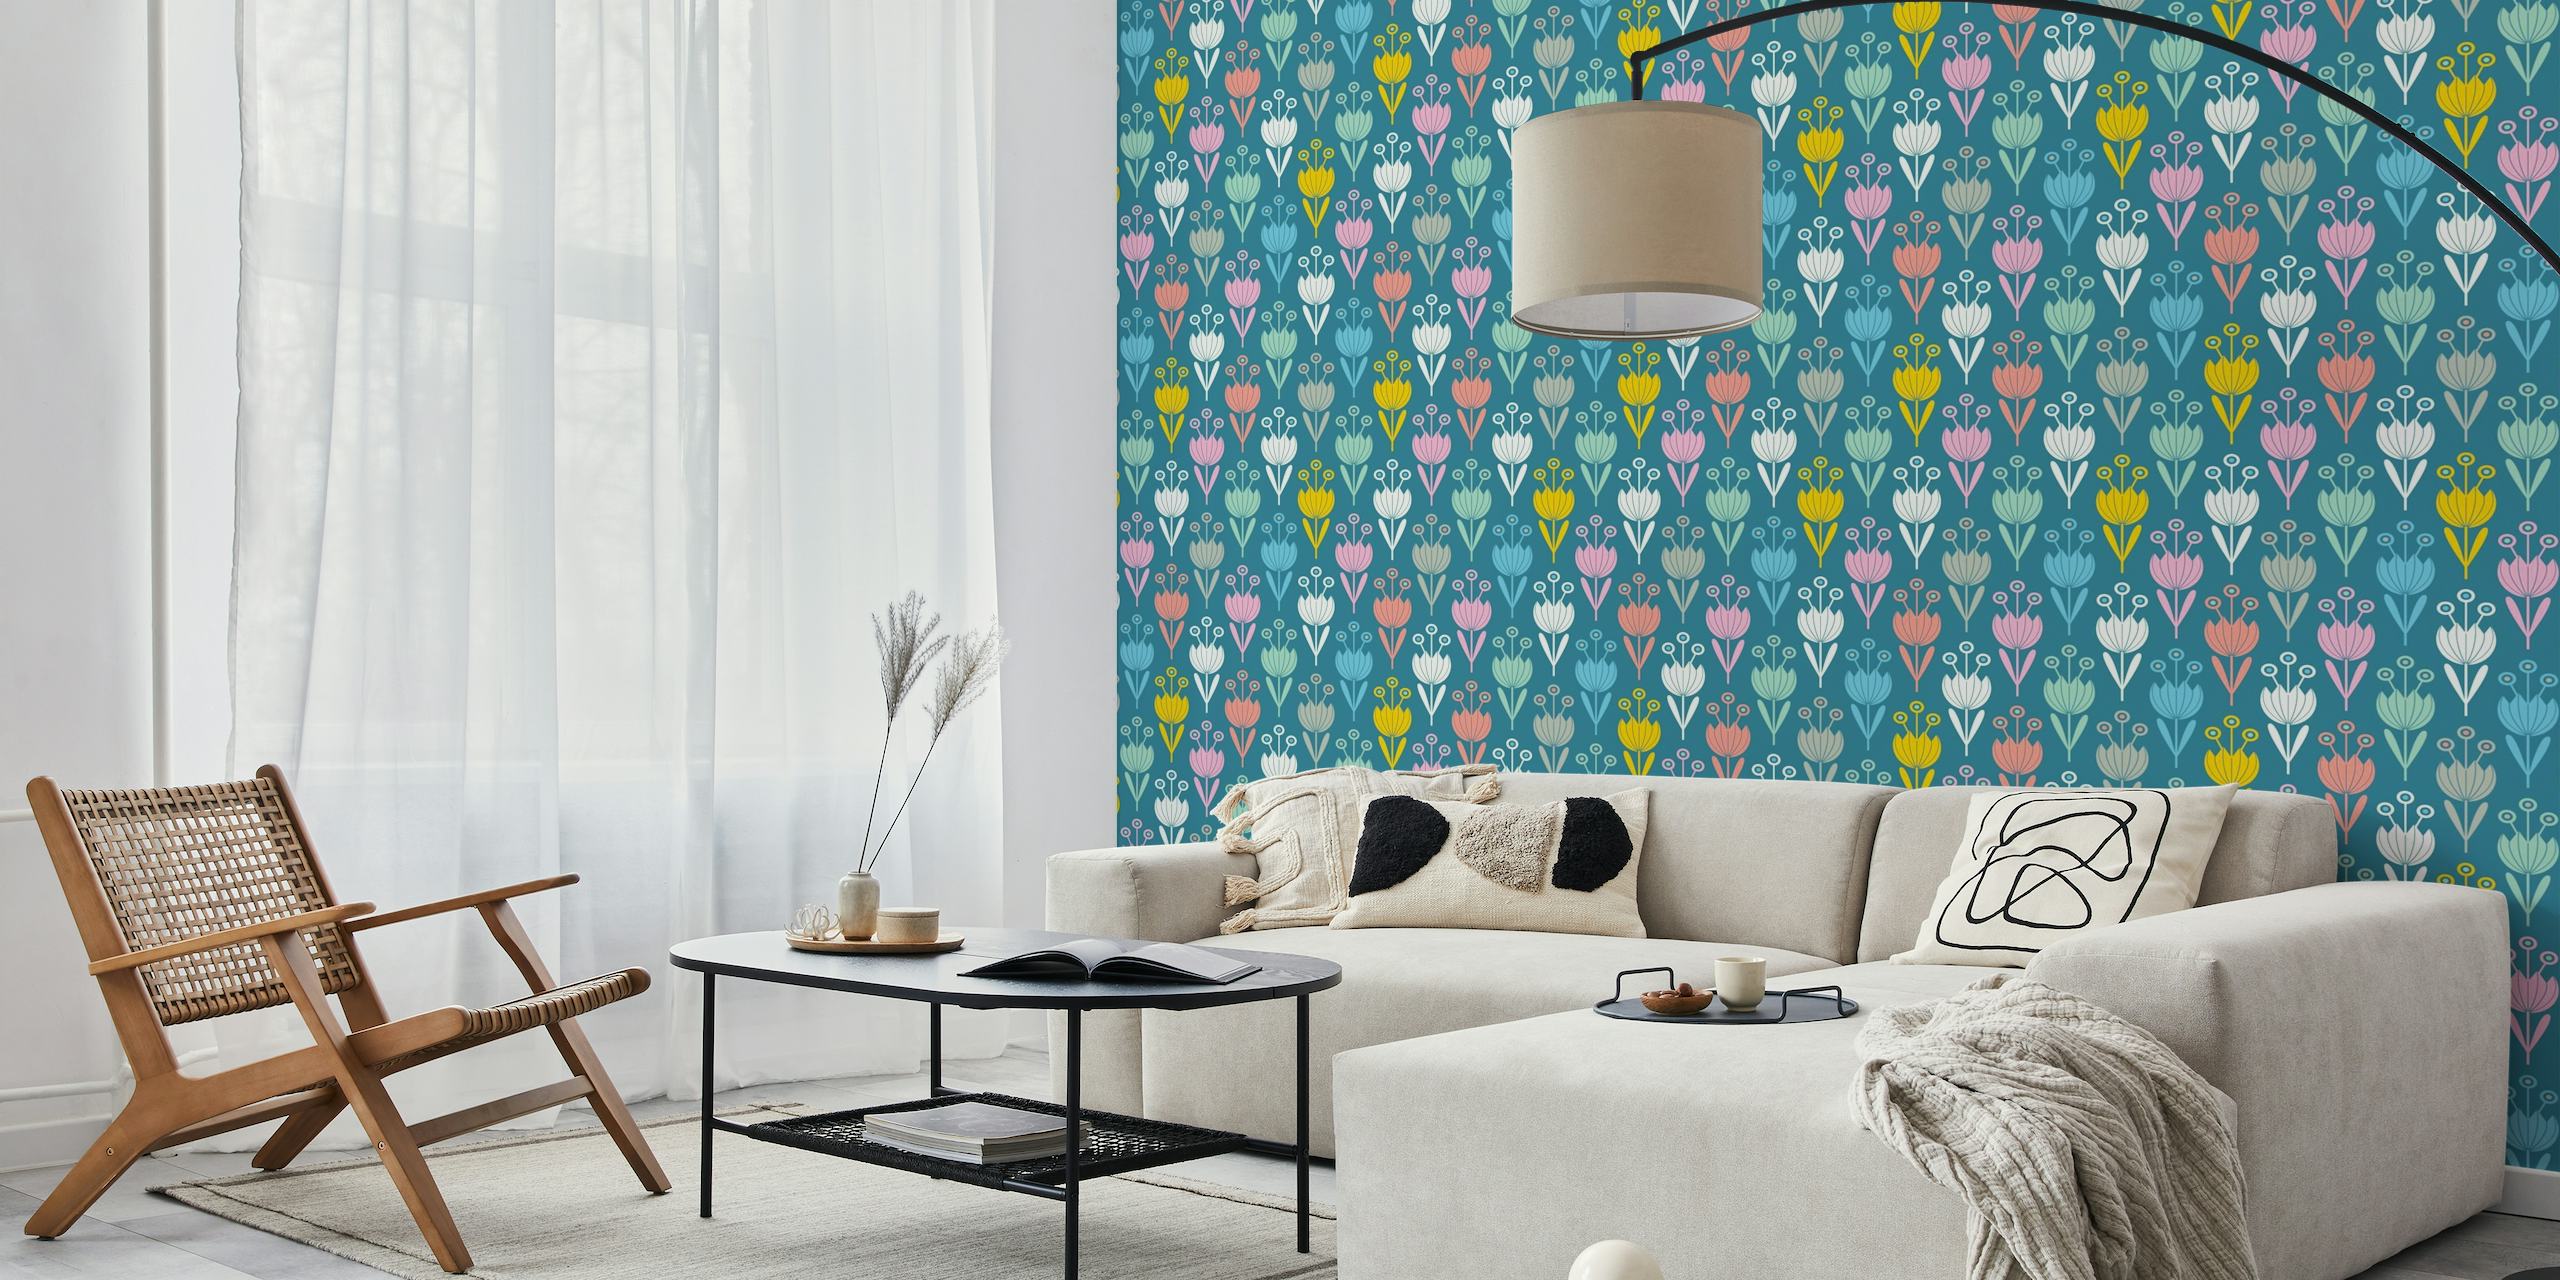 Stylized pastel tulips on a teal background wall mural